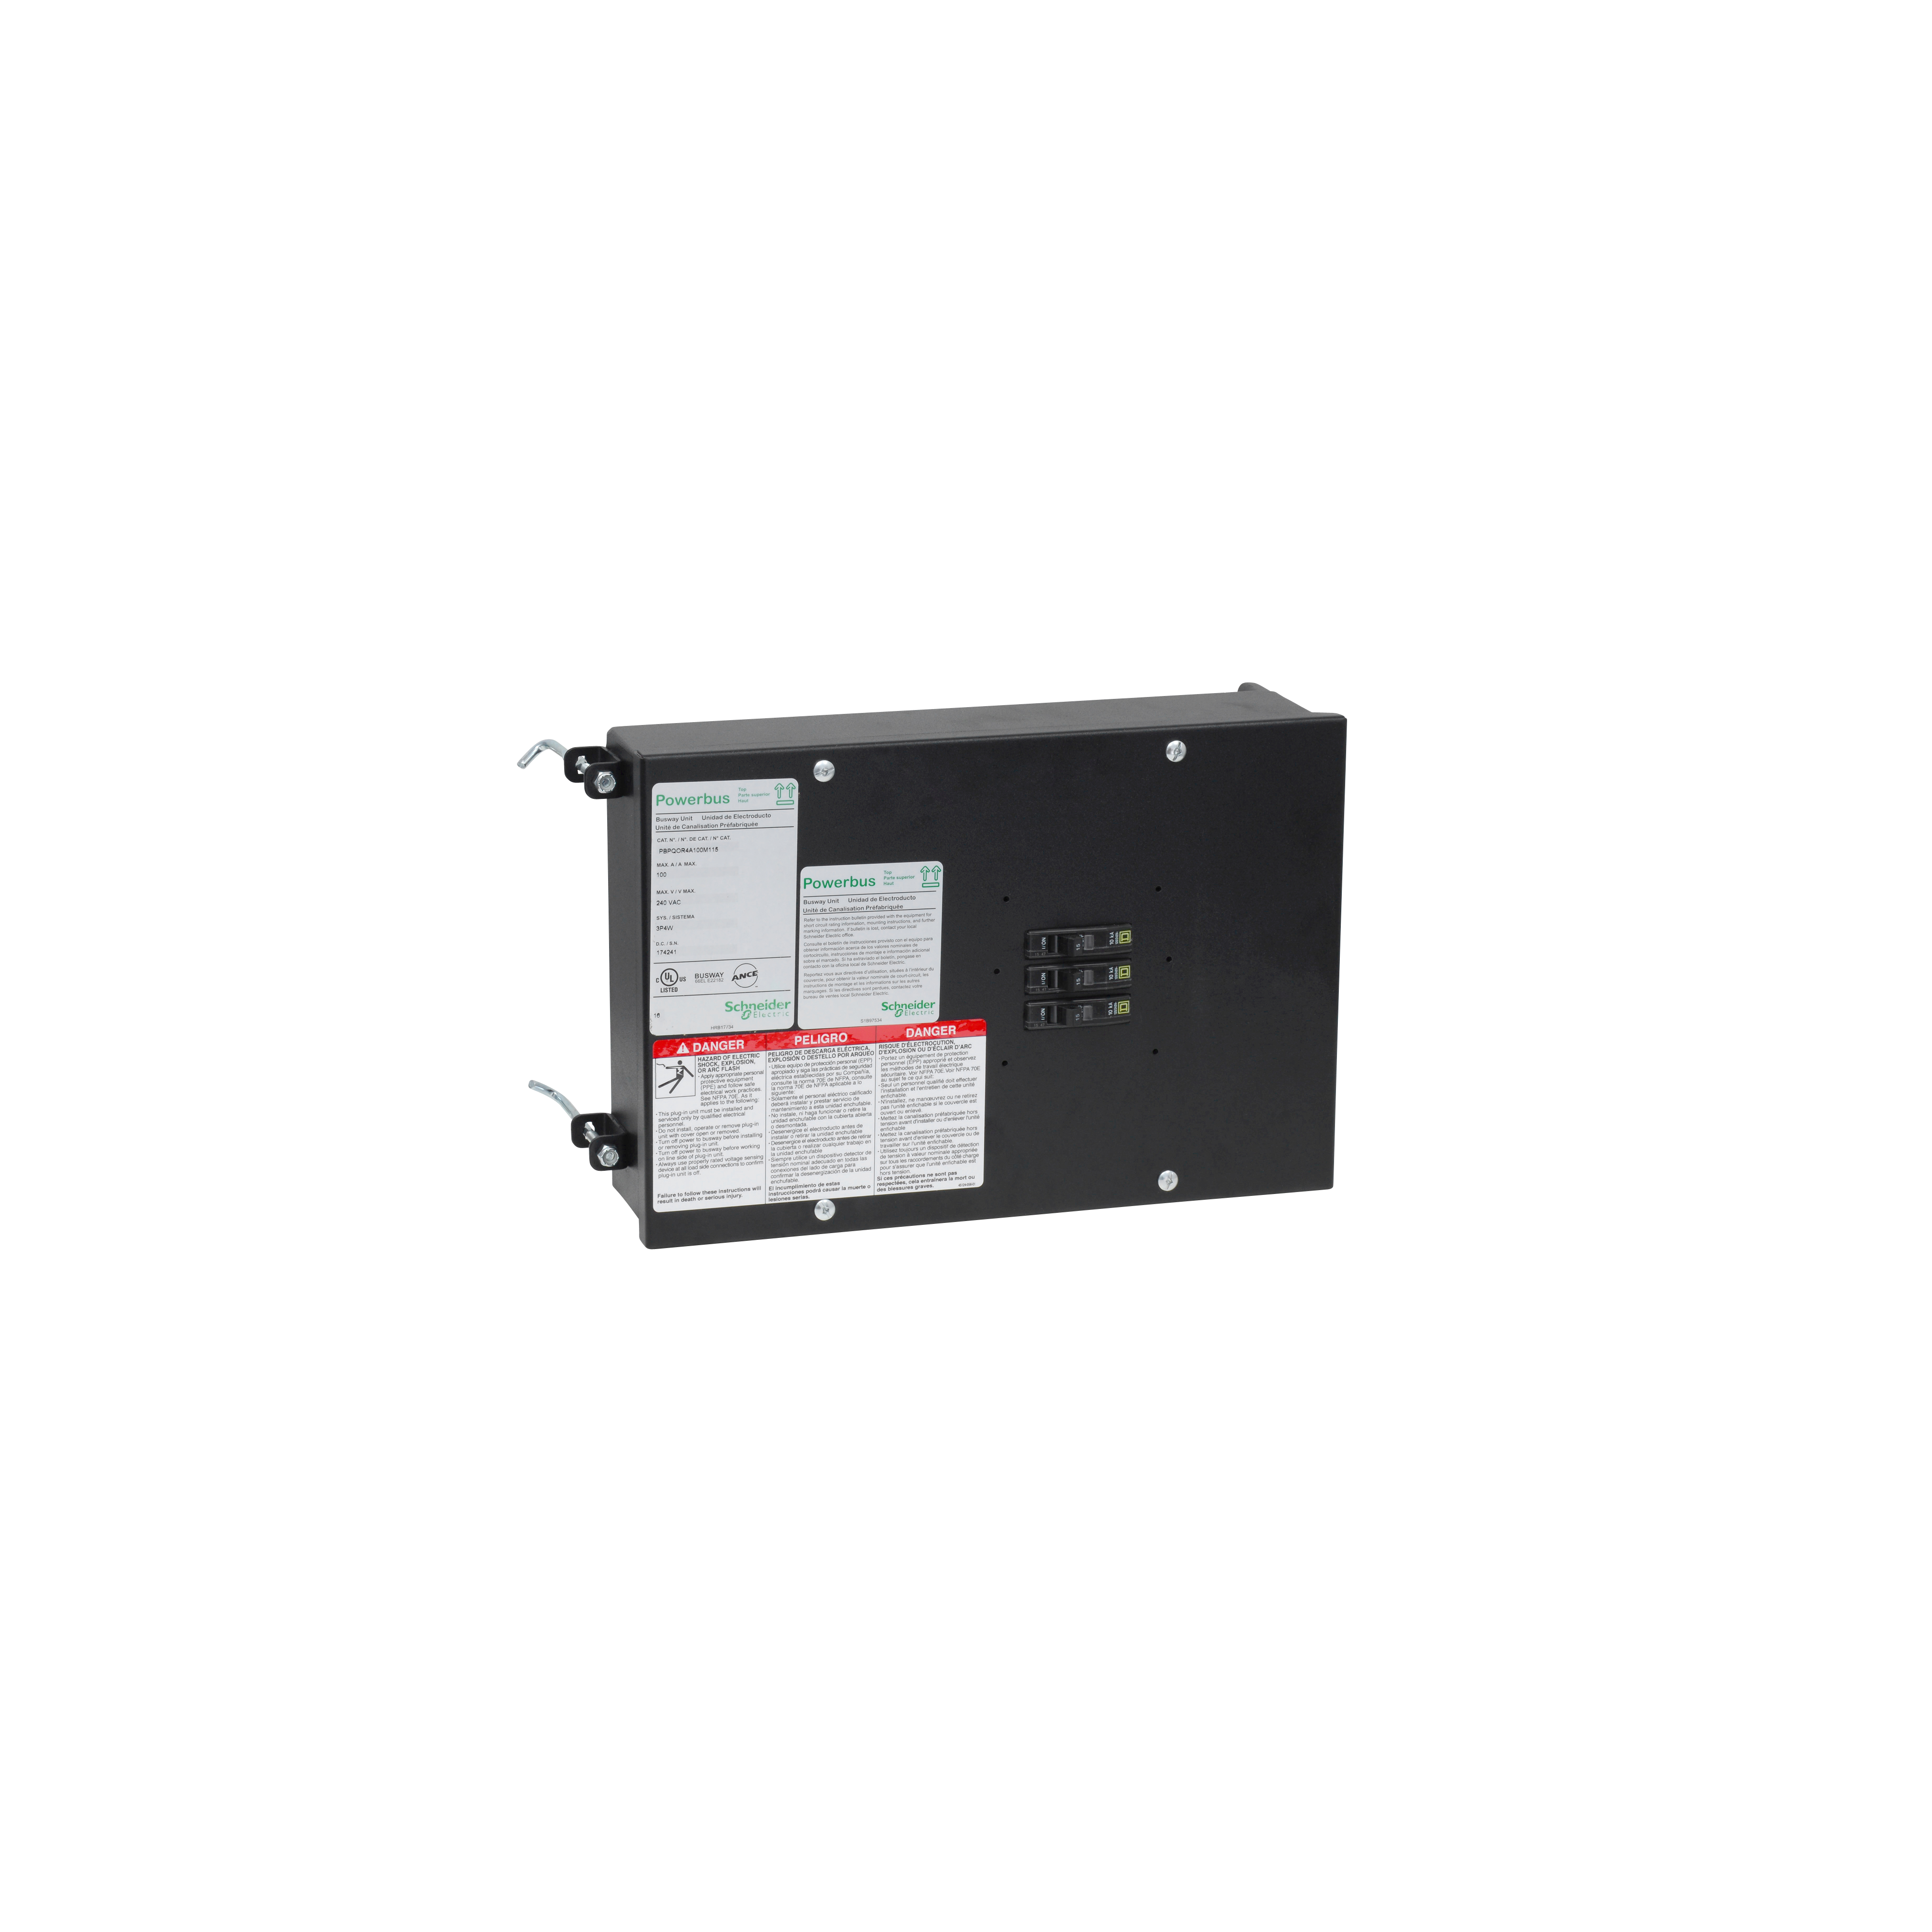 Busway Circuit Breaker Plug-in Unit 15A, QOB, 5A, Type 4 with 3 Receptacles